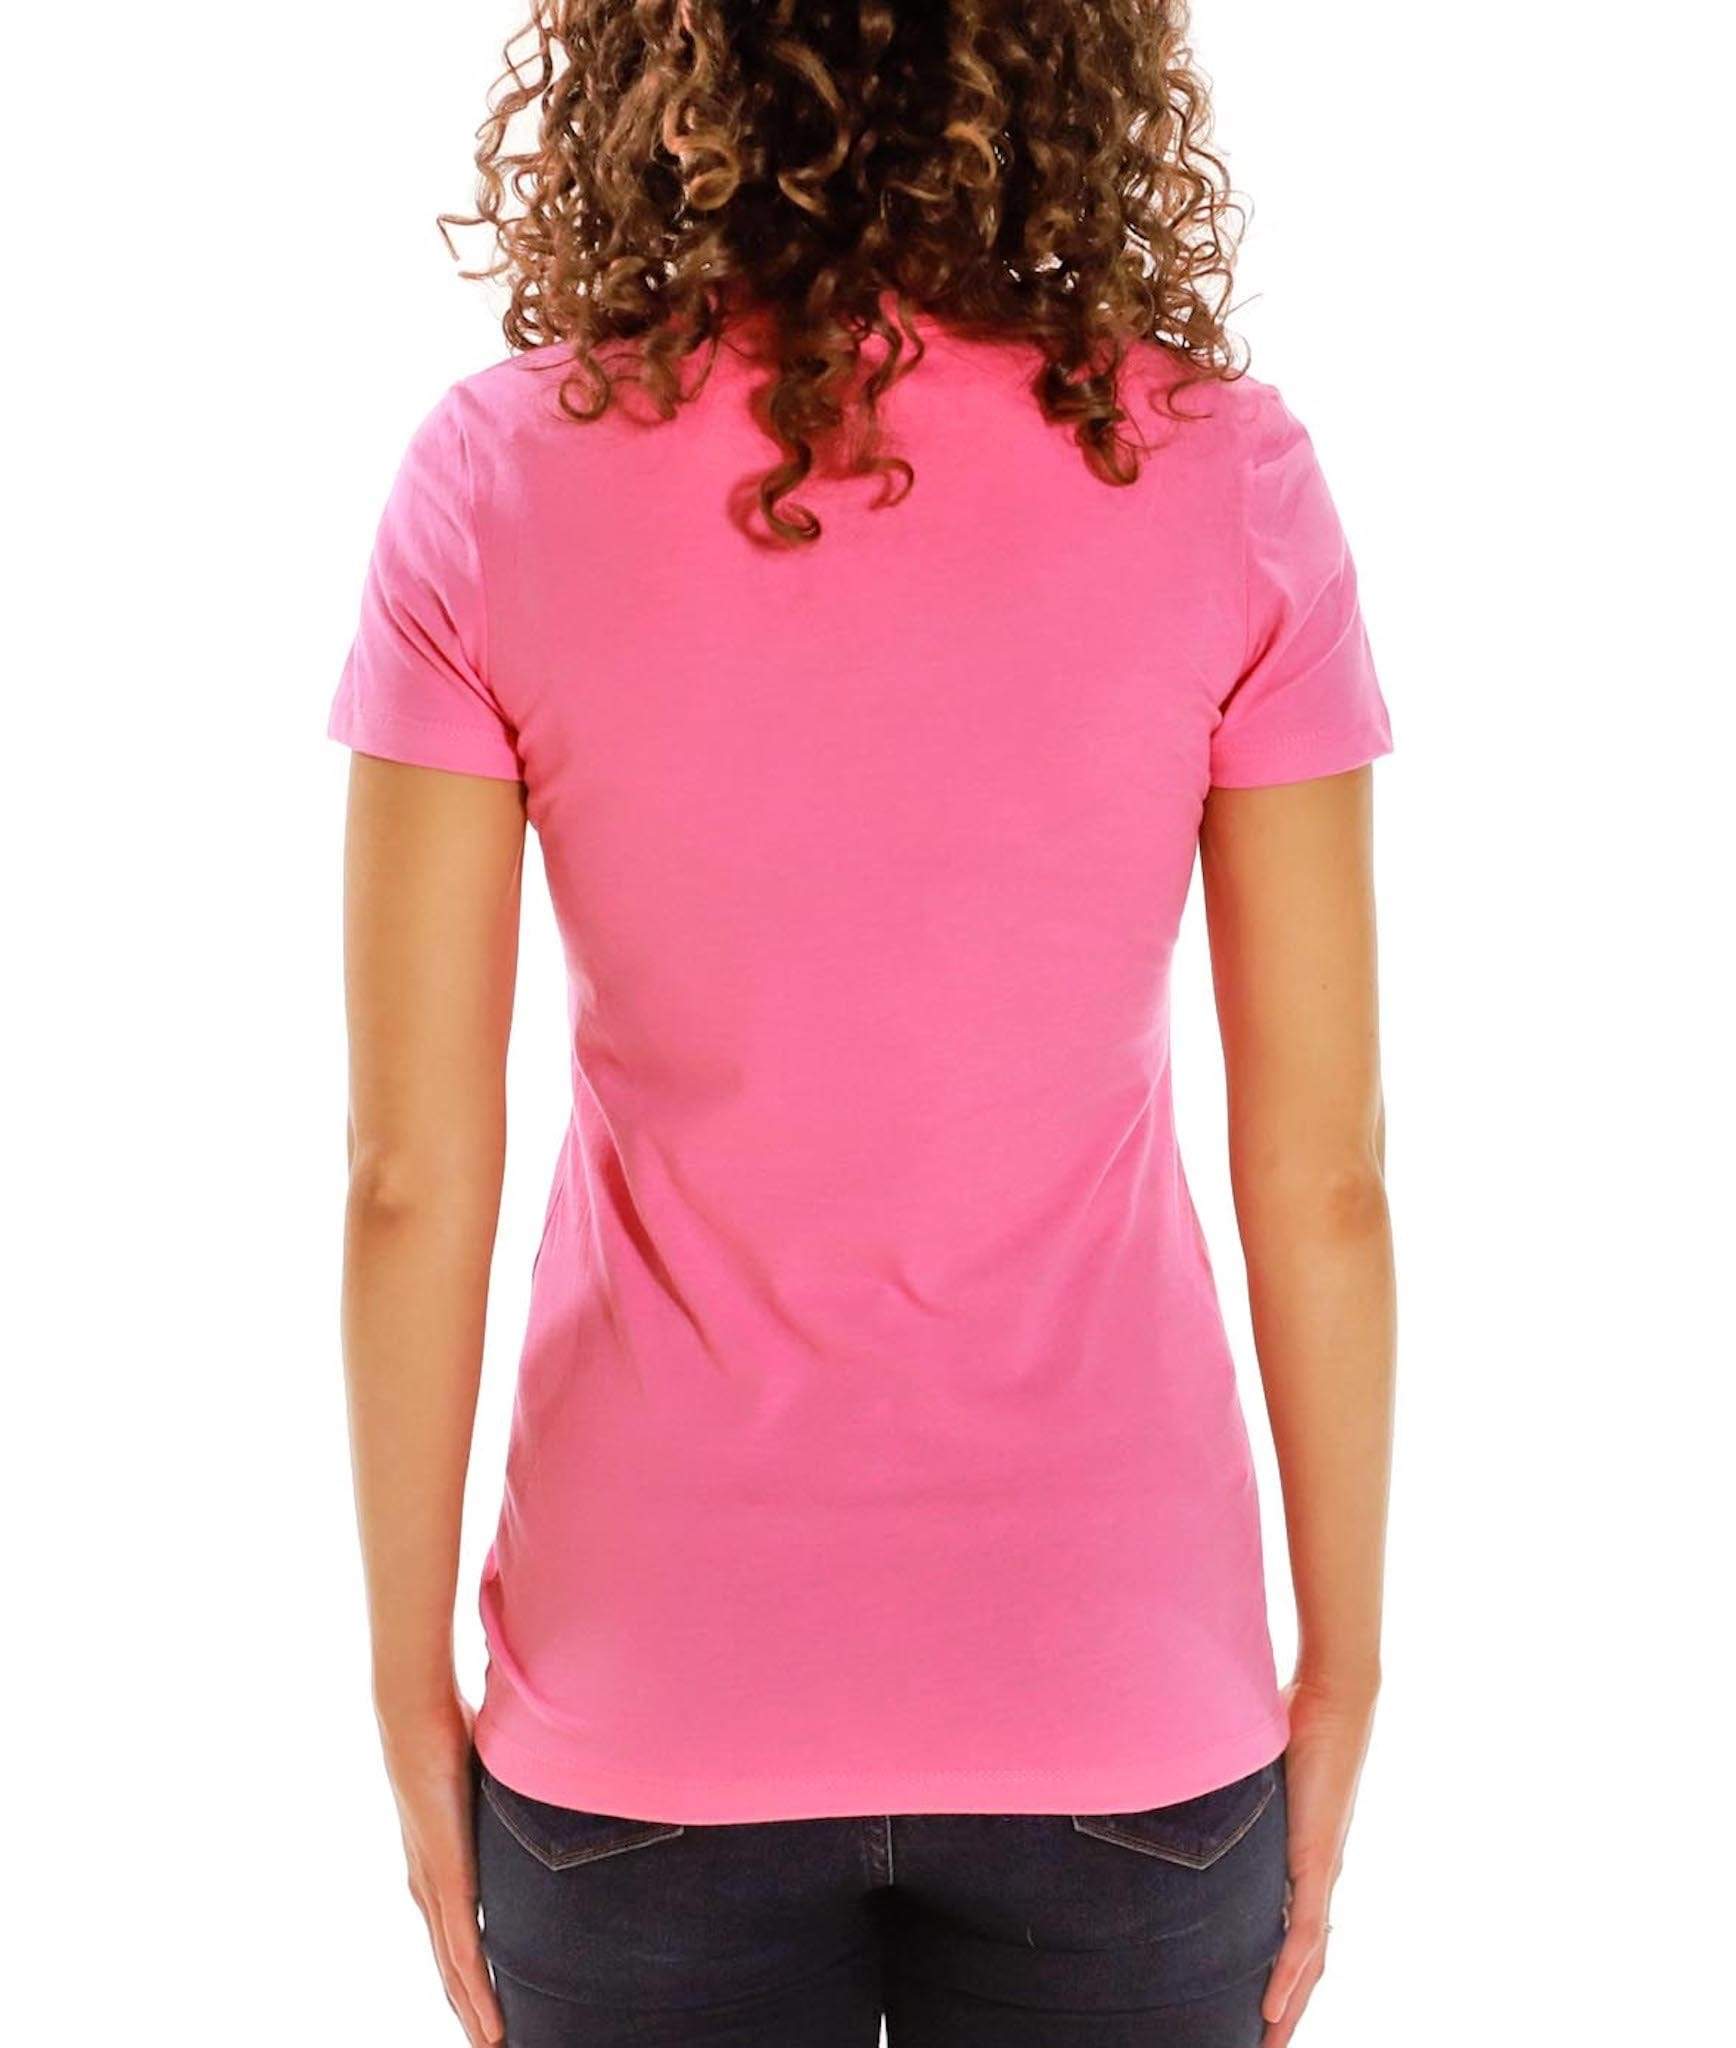 Nayked Apparel Women Women's Ridiculously Soft V-Neck T-Shirt